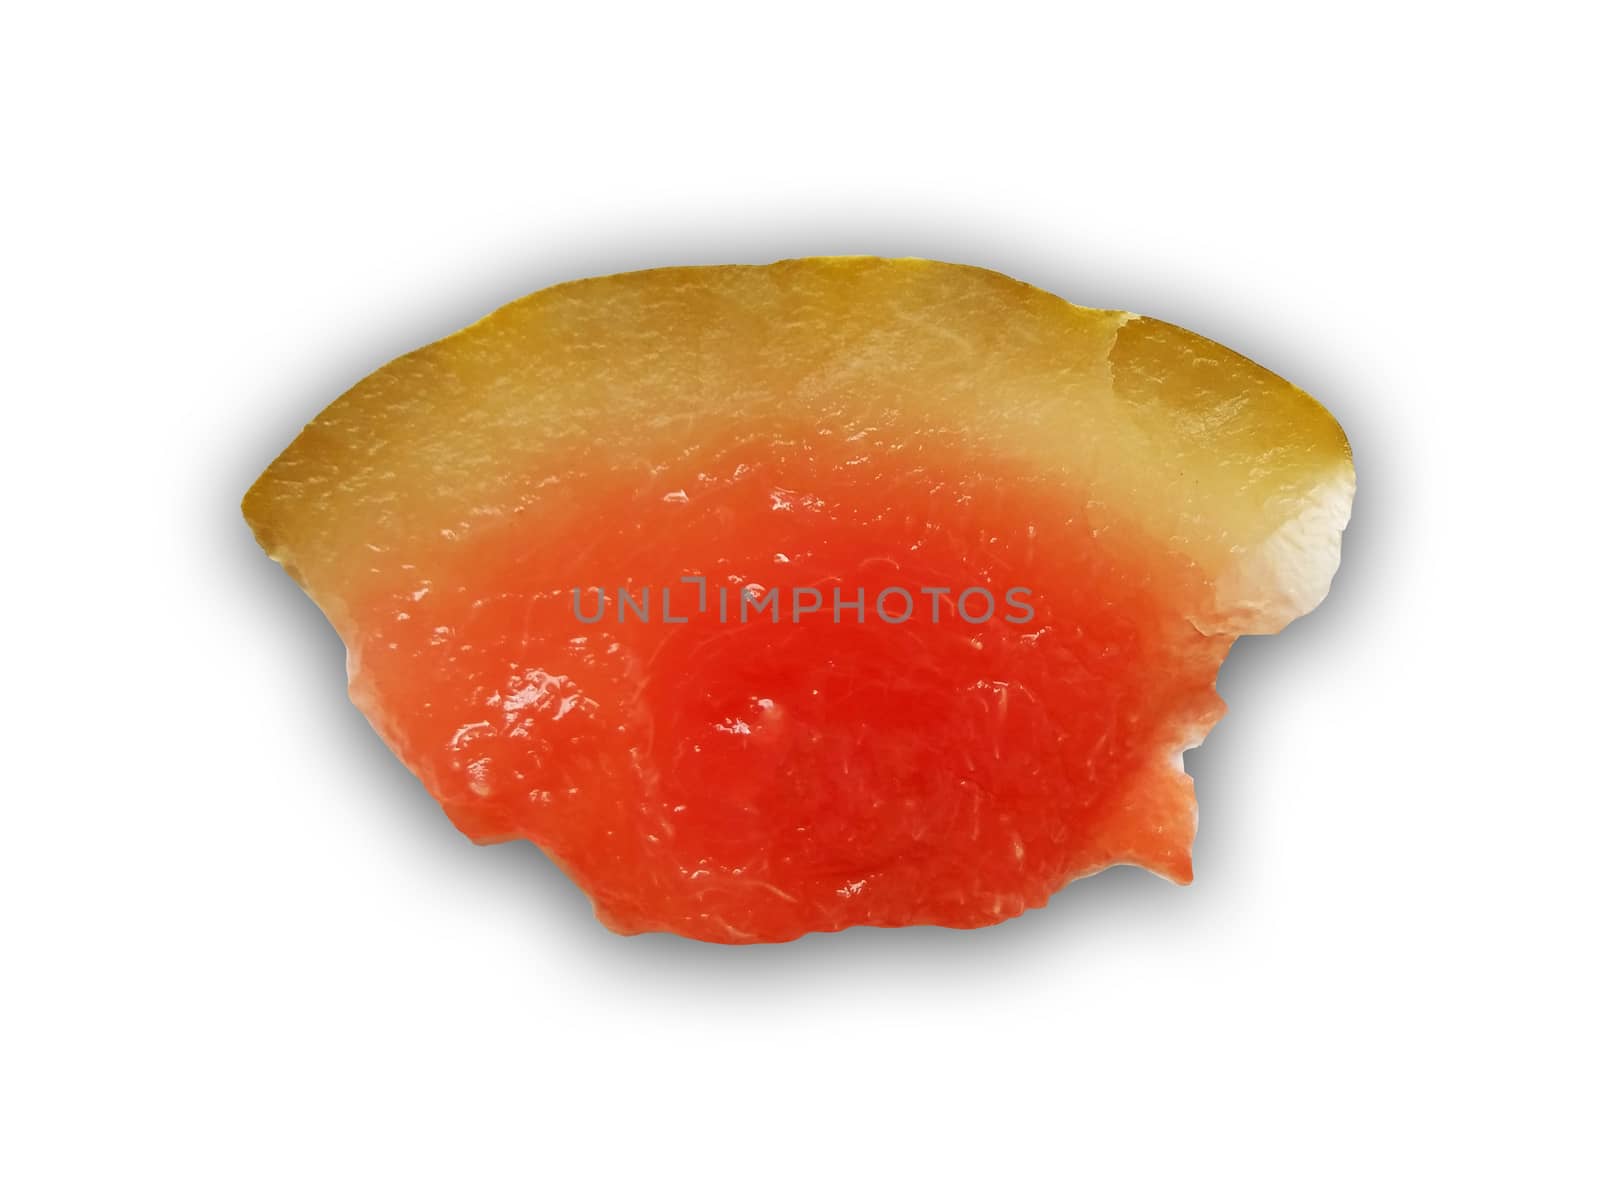 A slice of pickled watermelon on white background